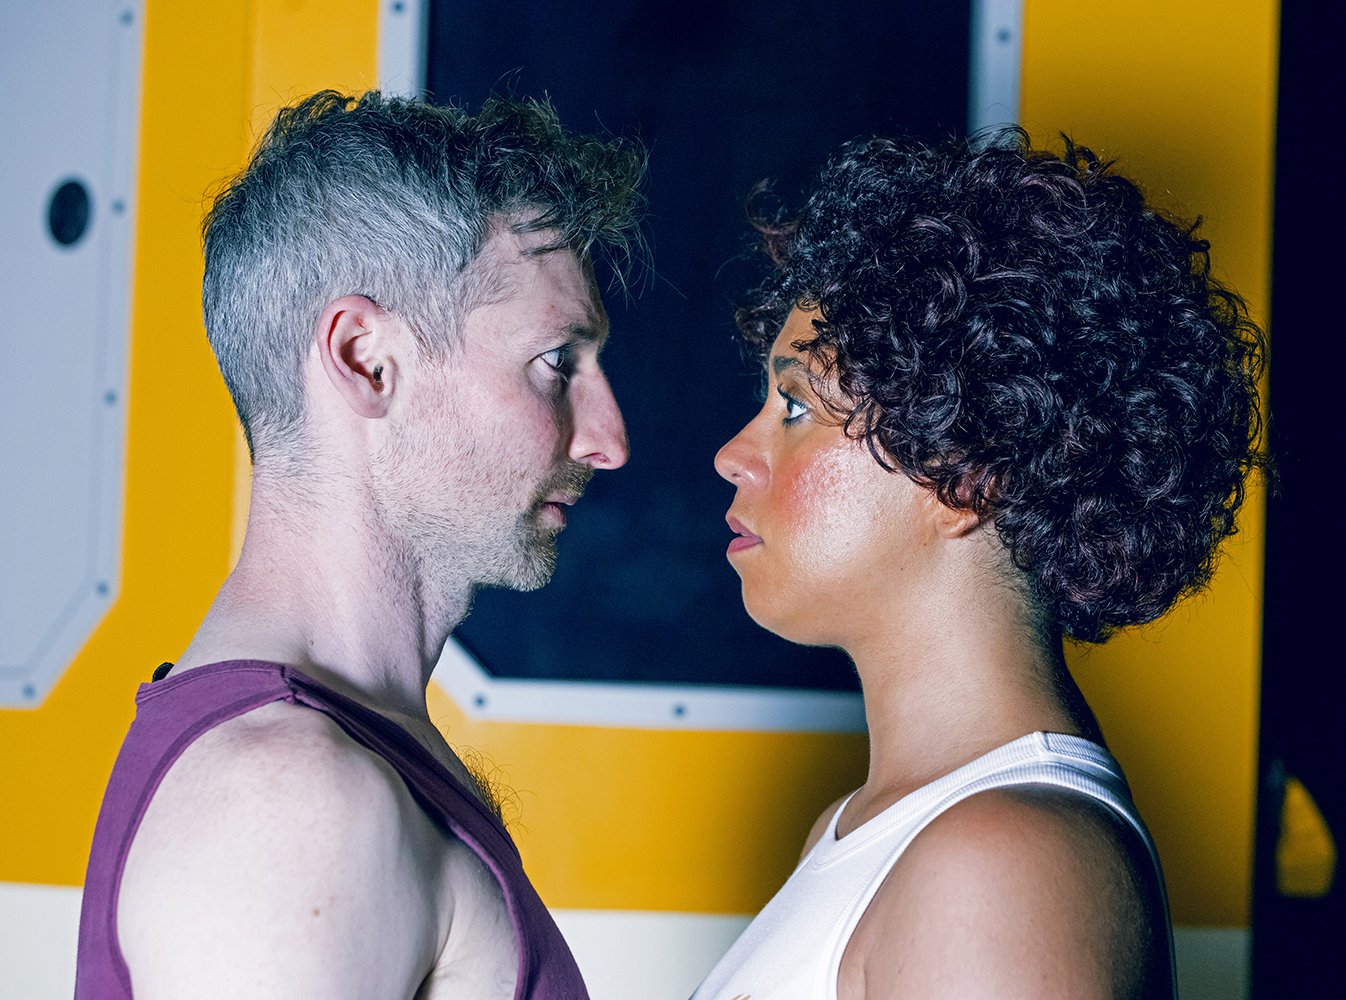 Actor Ian Bond (a white man with silver/brown hair, wearing a purple tank top) playing Ray, and actor Jay Woods (an Afro Puerto Rican woman with caramel skin and black curly hair wearing a white tank top), playing Kelvin, are looking into each others' eyes, standing practically nose-to-nose. They are in front of a yellow-painted space station wall with a porthole directly behind them.